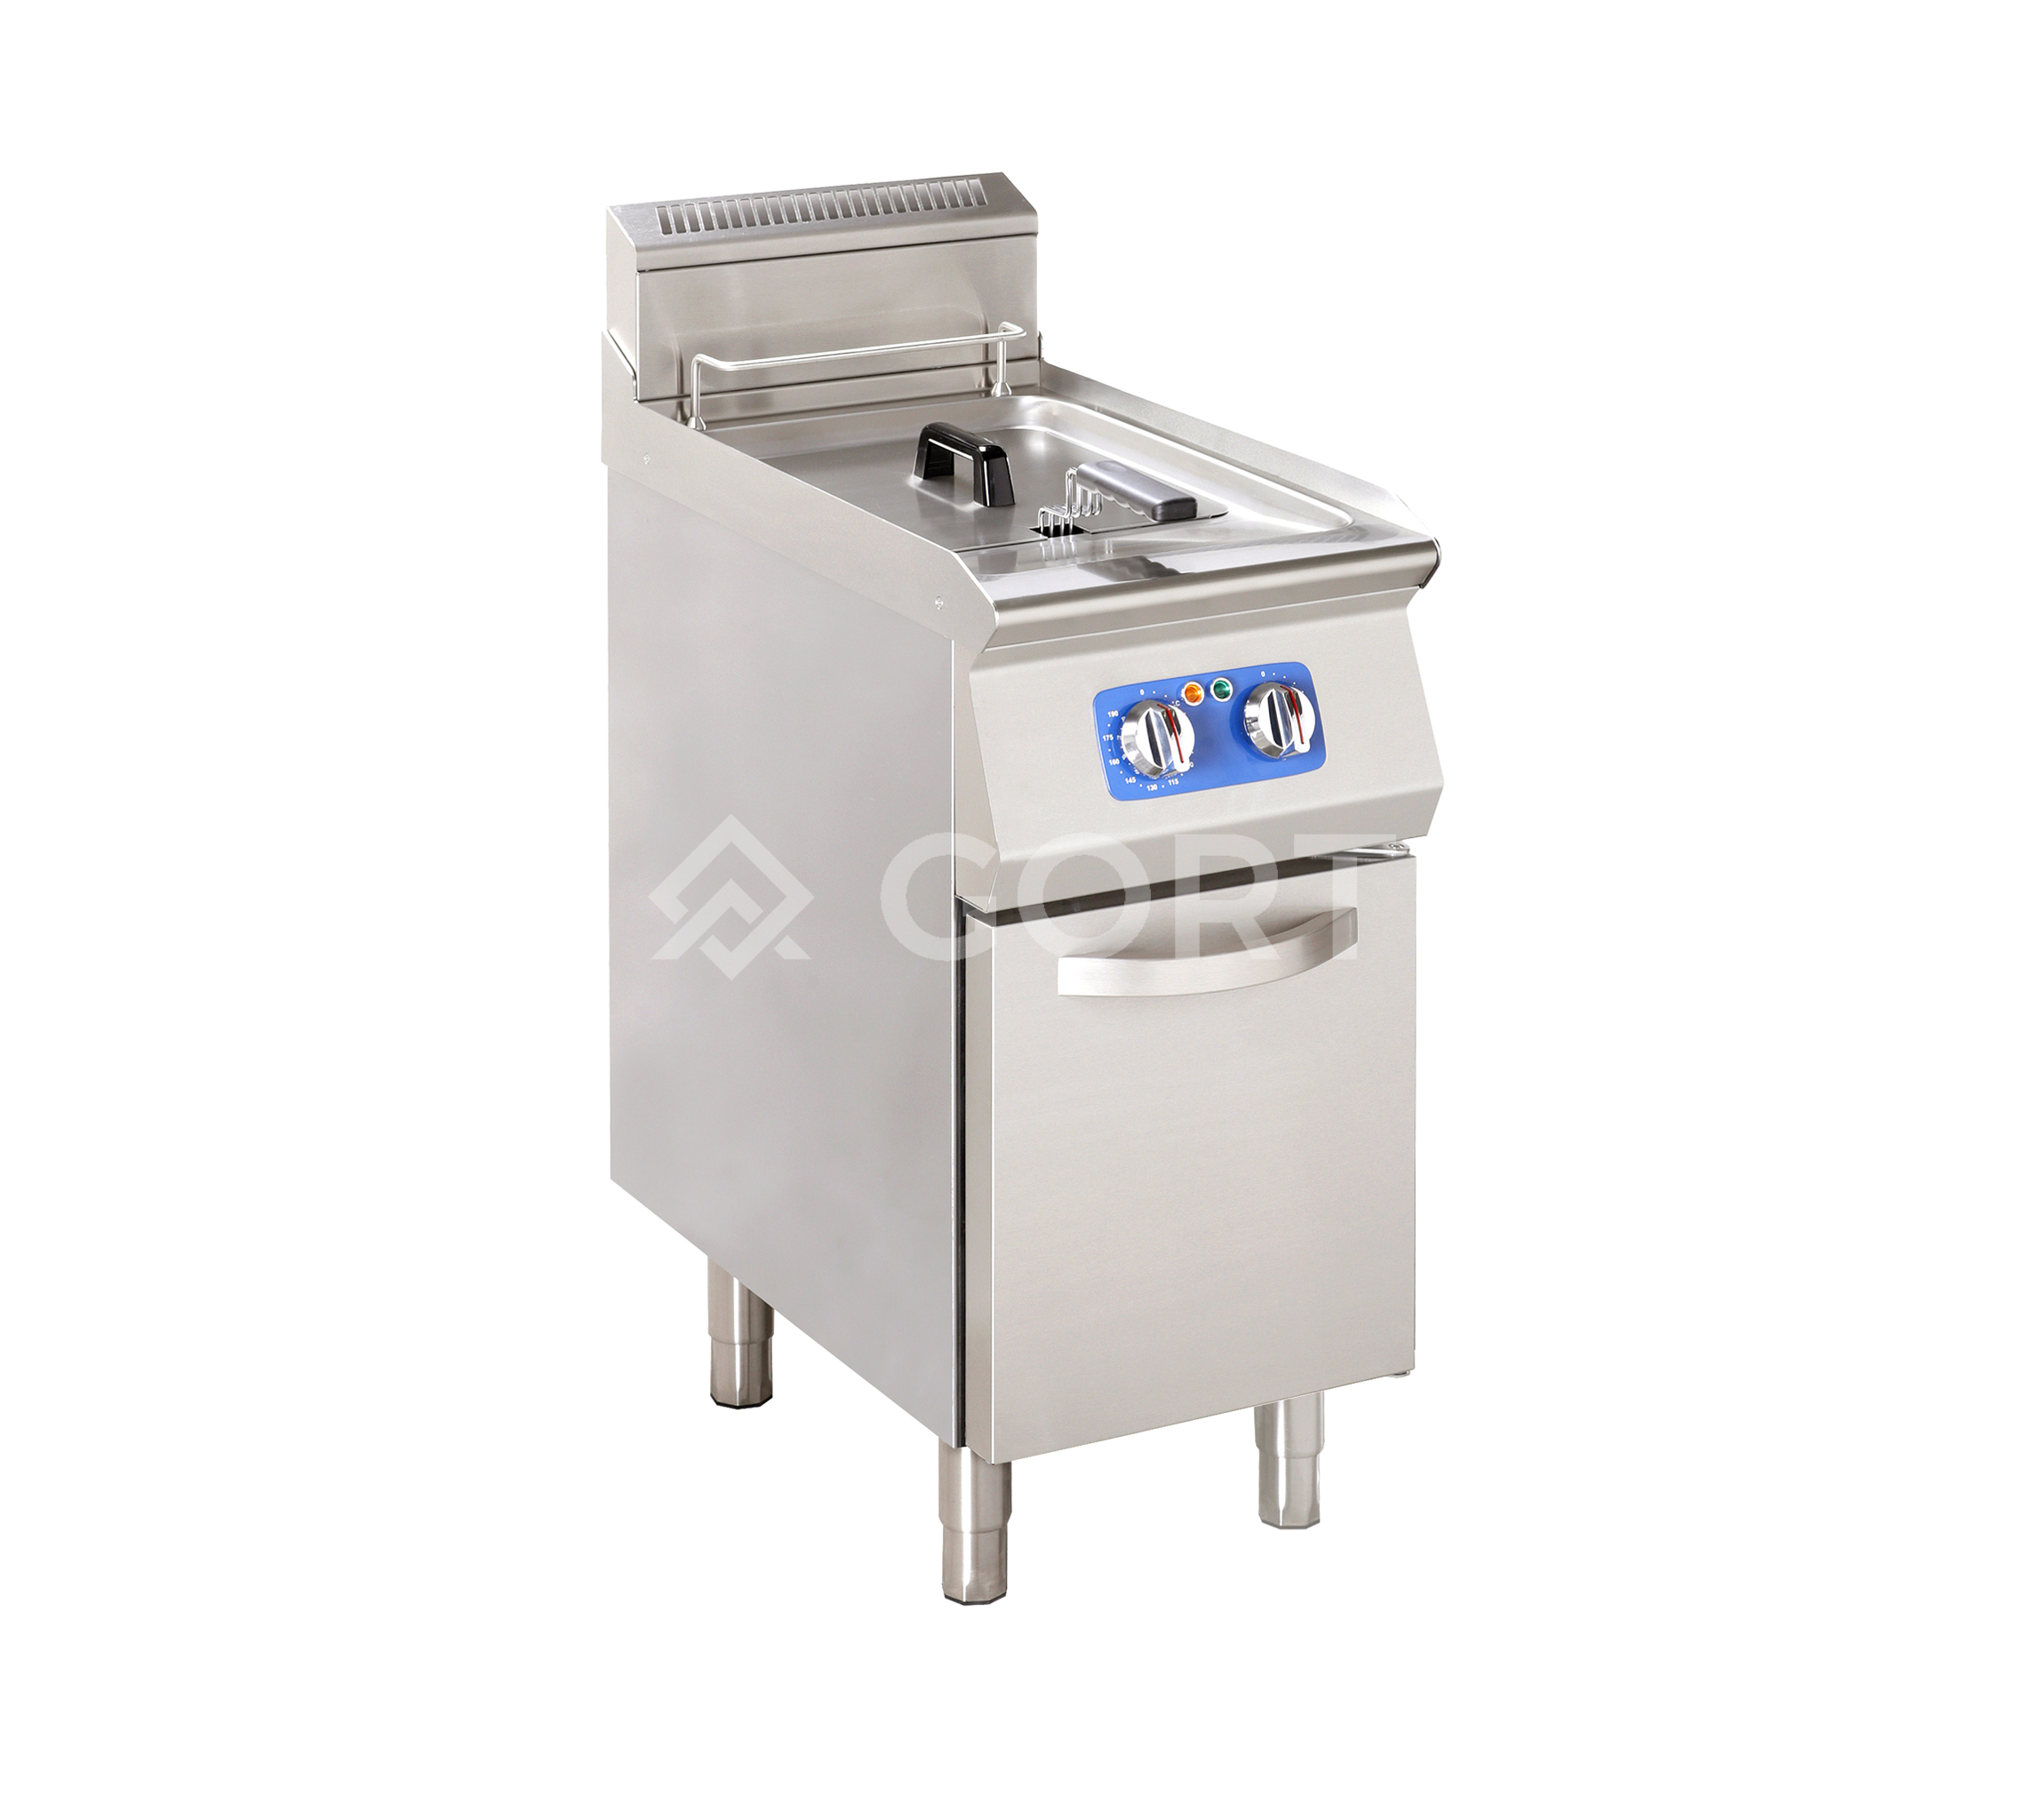 Single tank electric fryer with cold zone